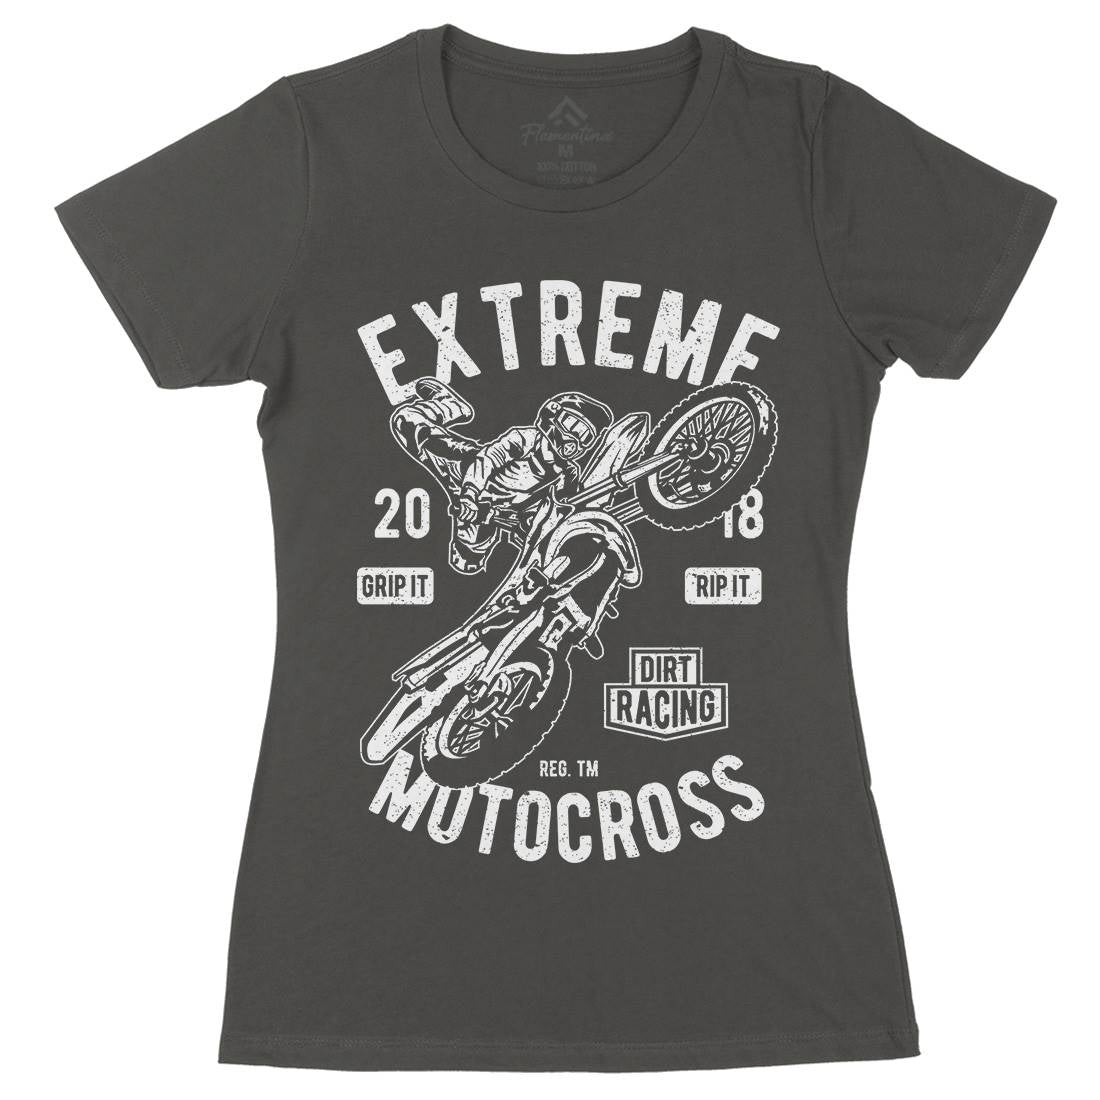 Extreme Motocross Womens Organic Crew Neck T-Shirt Motorcycles A651